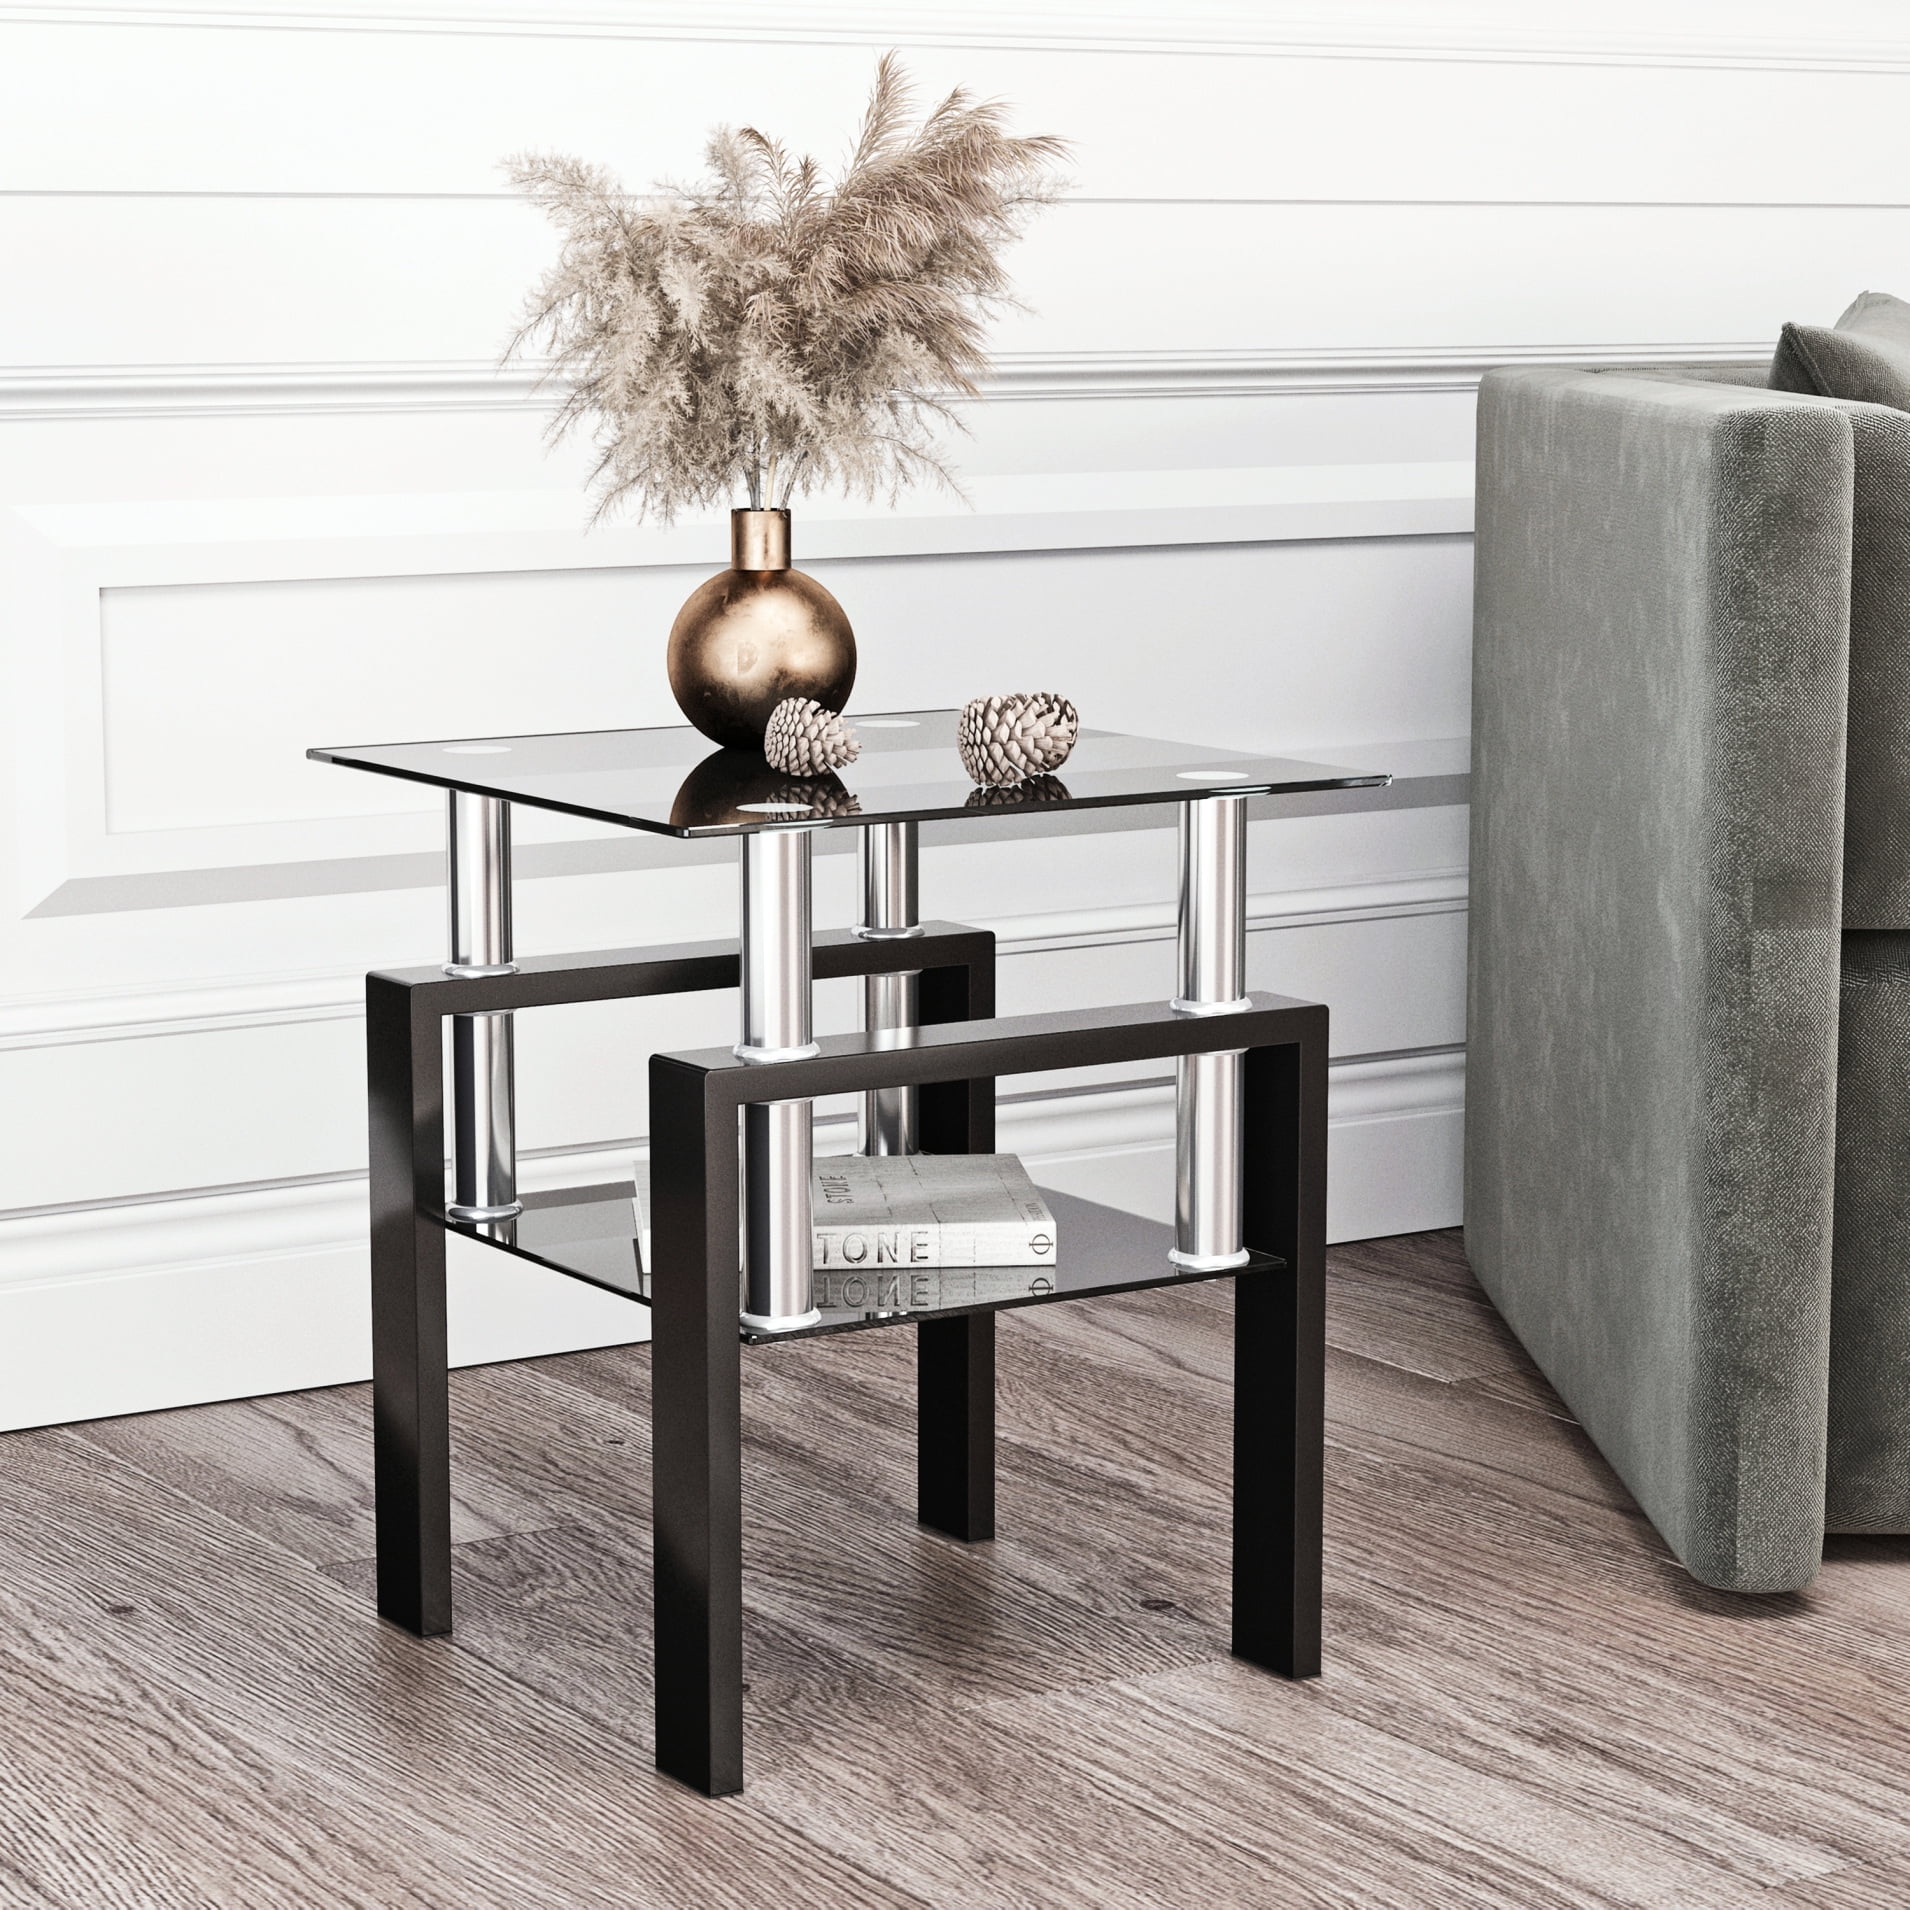 Square Terrarium Display End Table with Reinforced Glass in Black Iron- 18